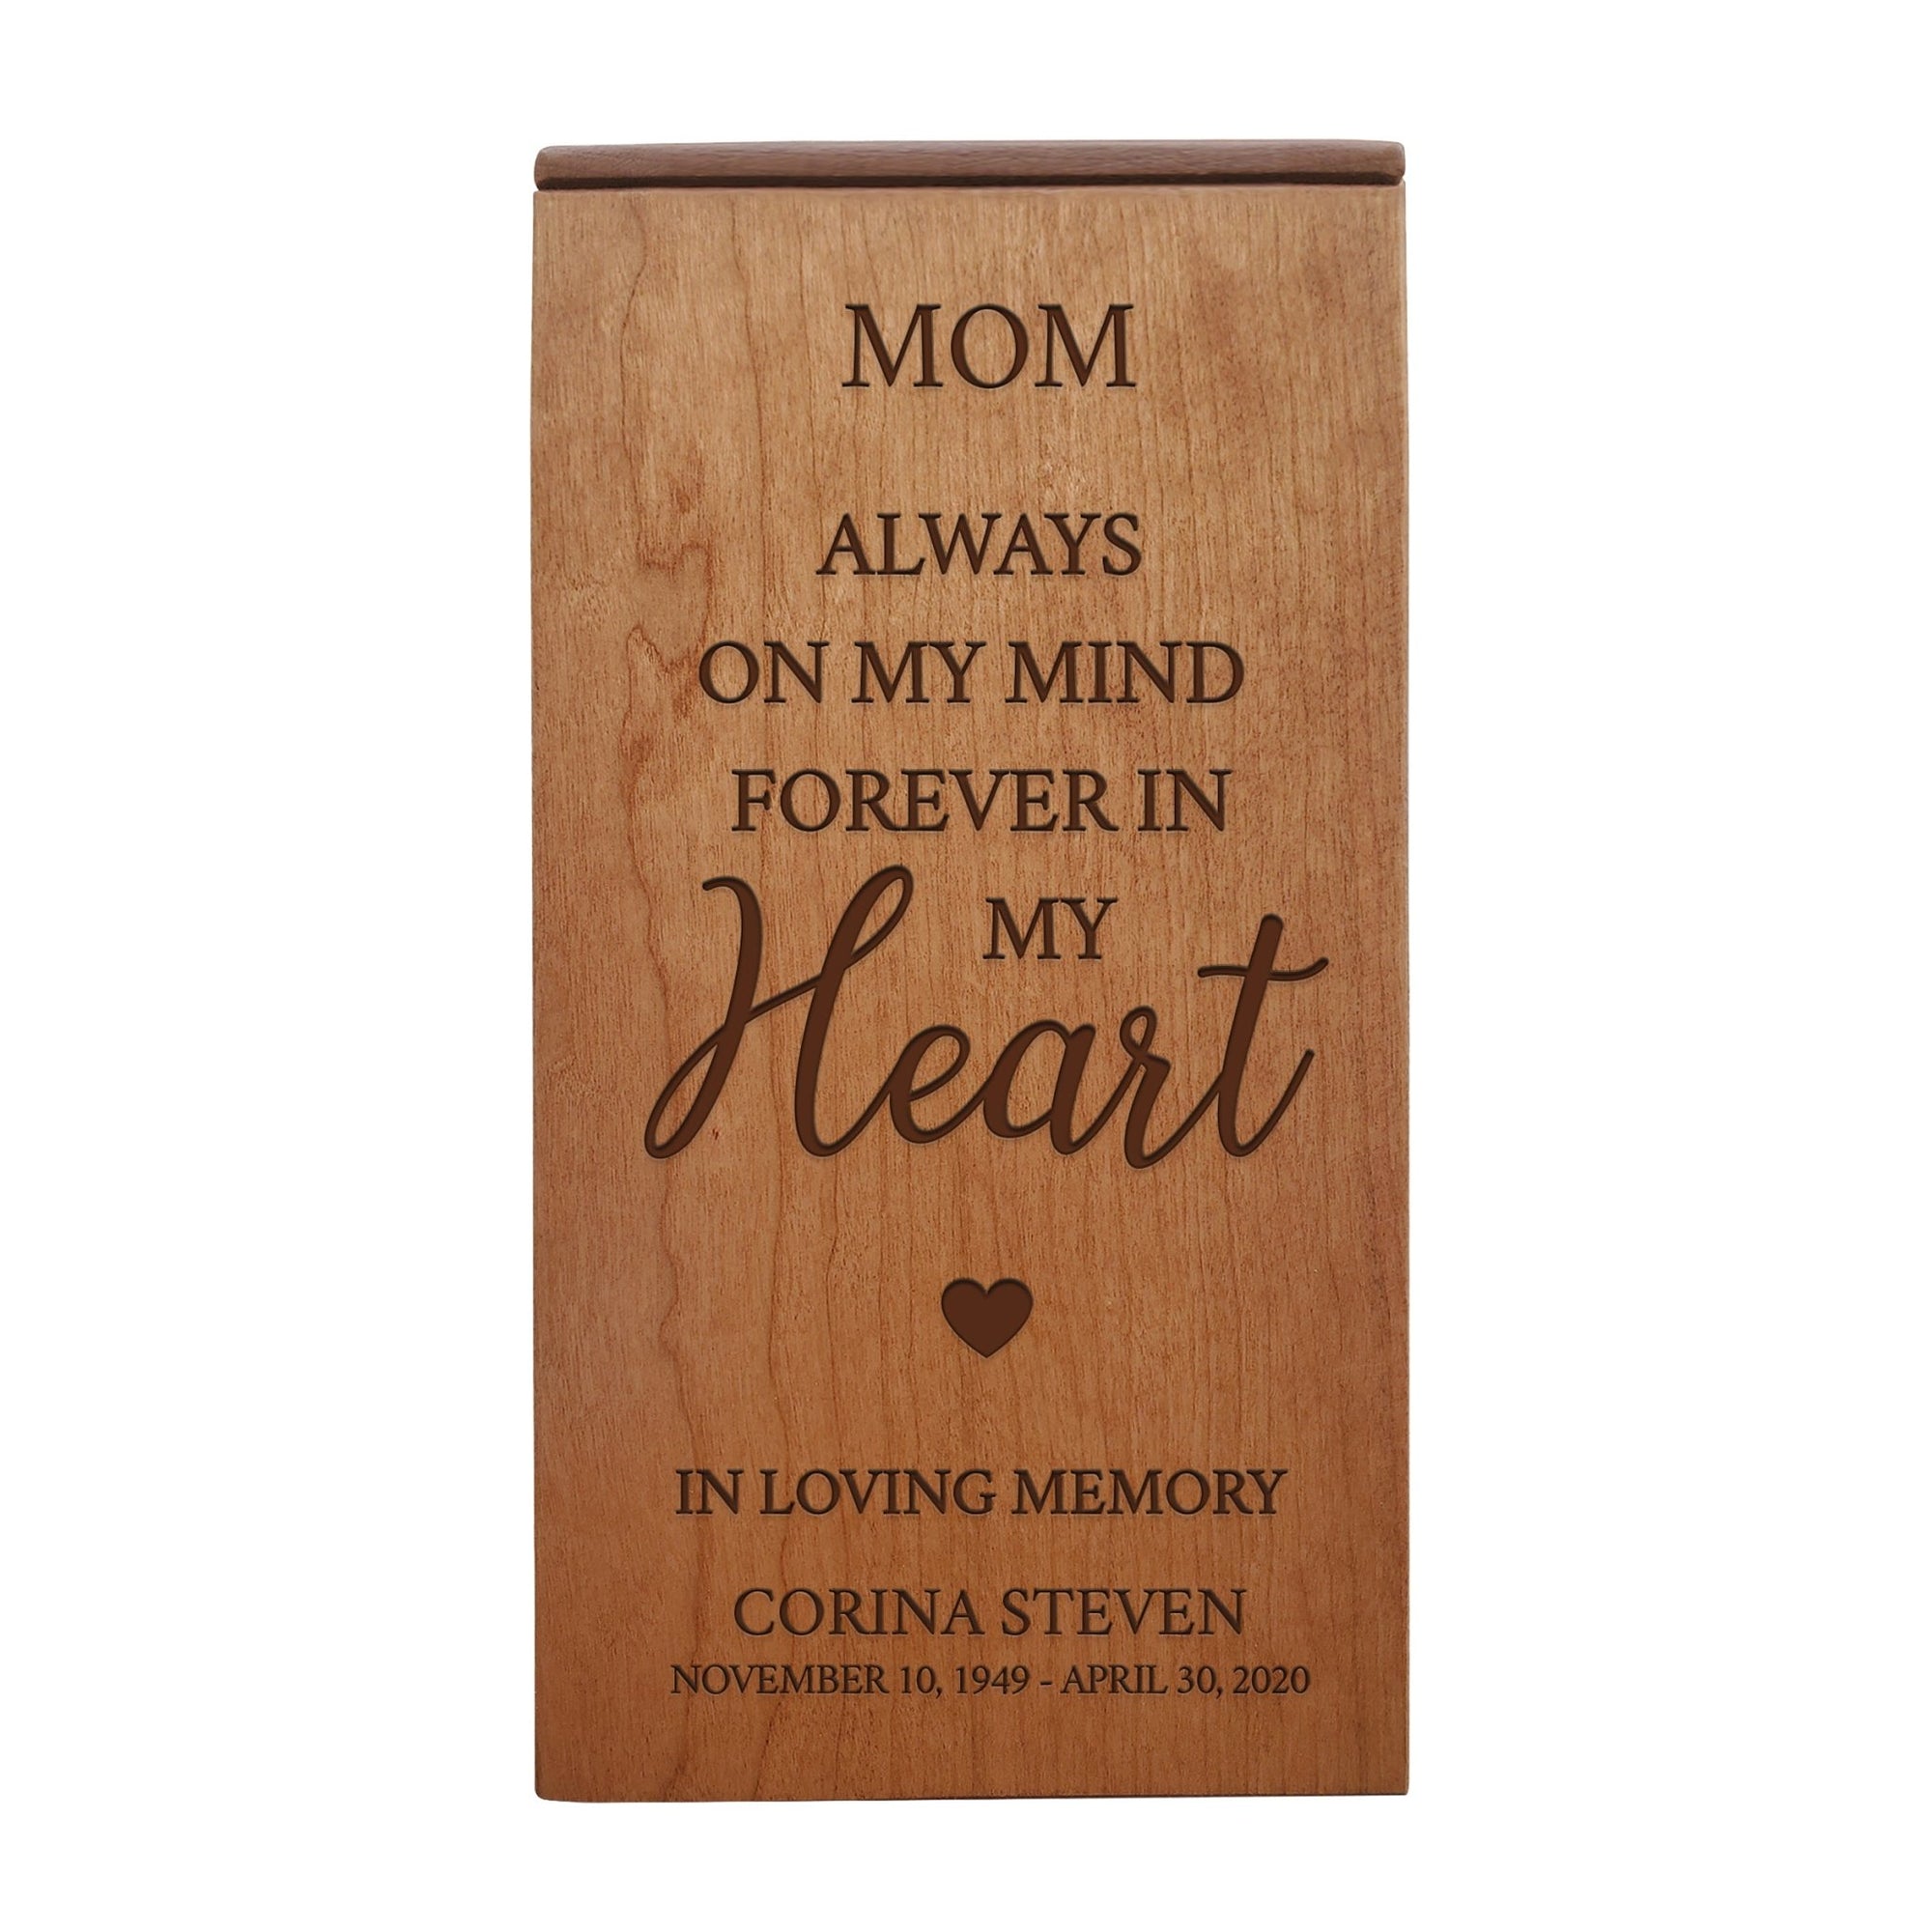 Custom Engraved Memorial Cremation Keepsake Urn Box holds 100 cu in of Ashes in - Mom, Always On My Mind - LifeSong Milestones